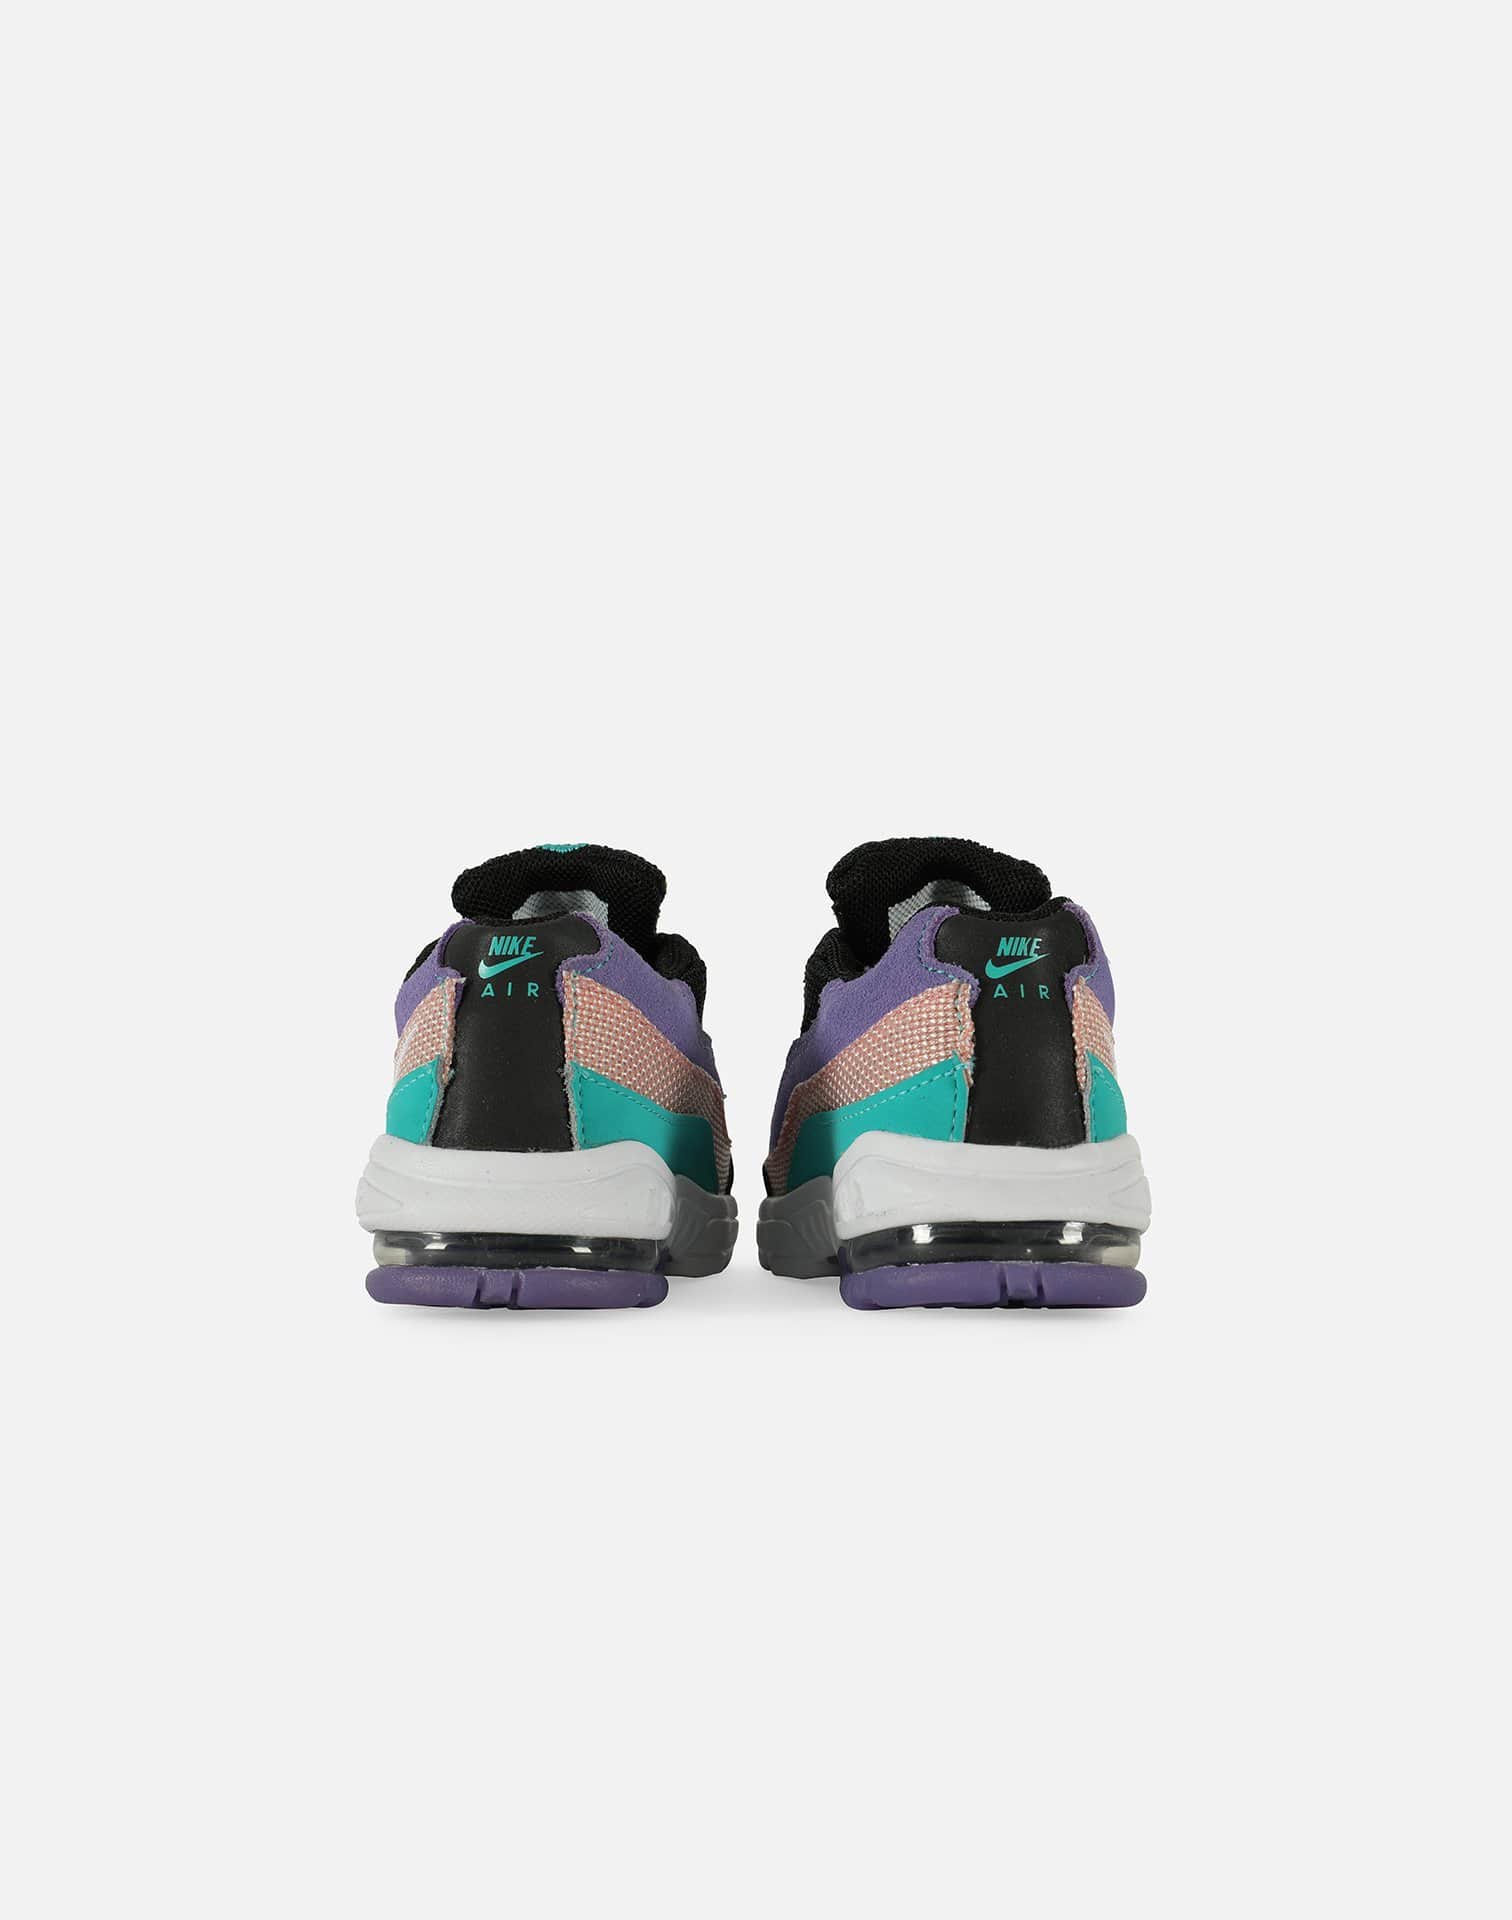 Nike Air Max 95 'Have A Nike Day' Infant